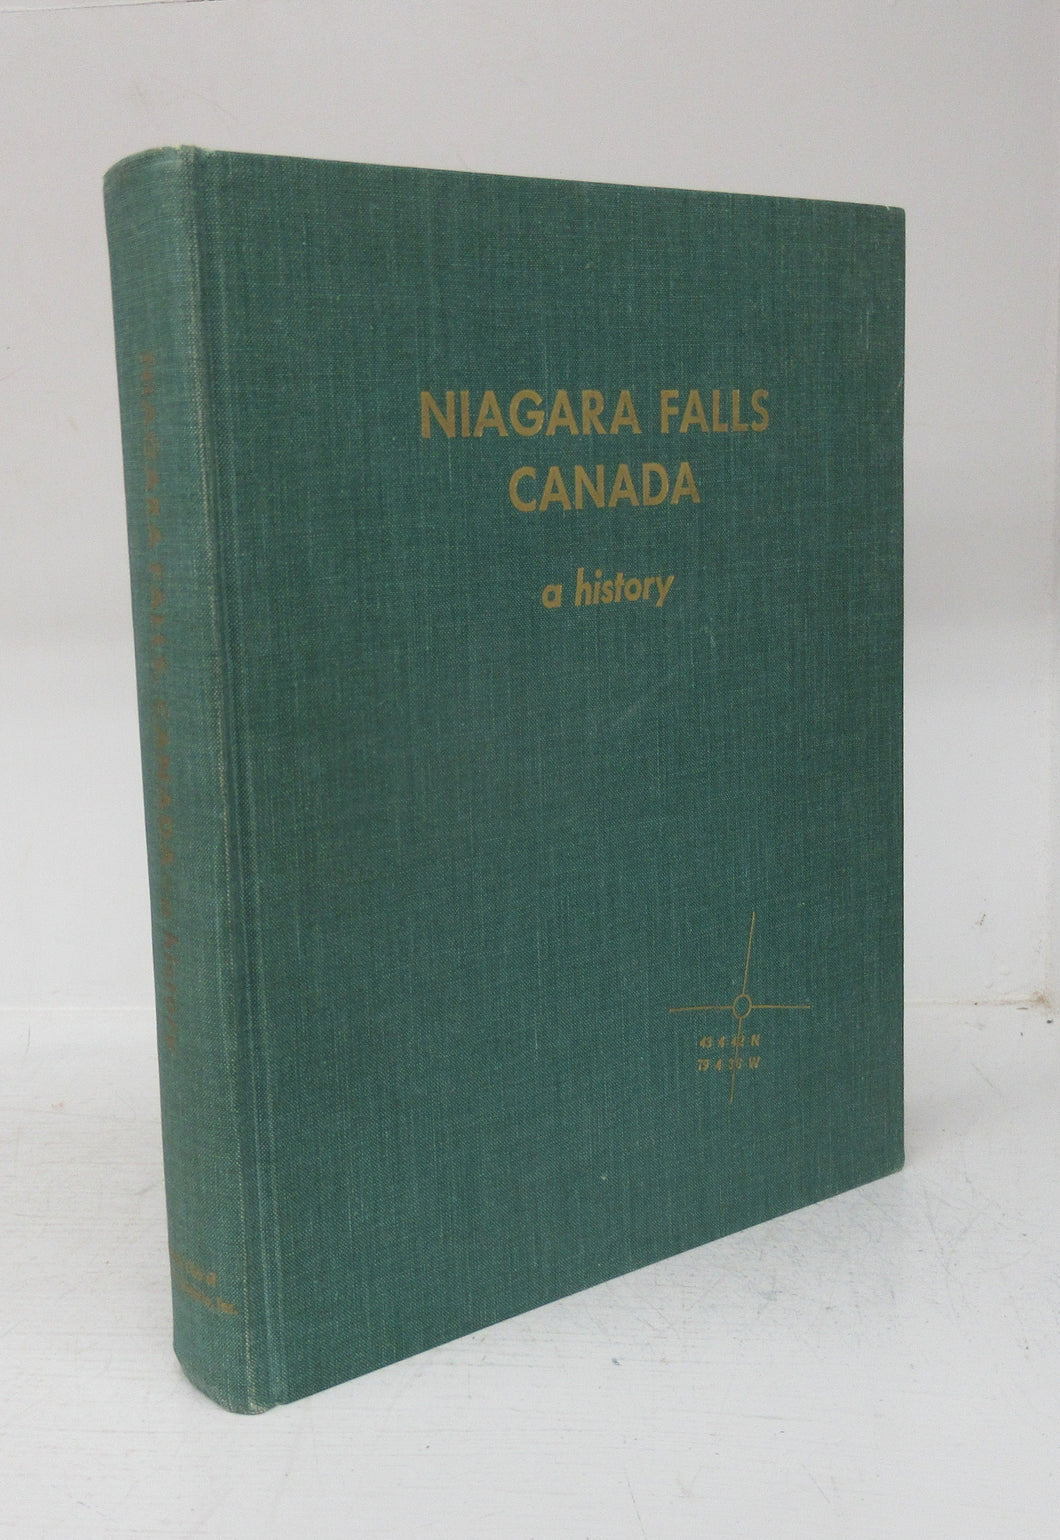 Niagara Falls, Canada: A History of the City and The World Famous Beauty Spot. An Anthology